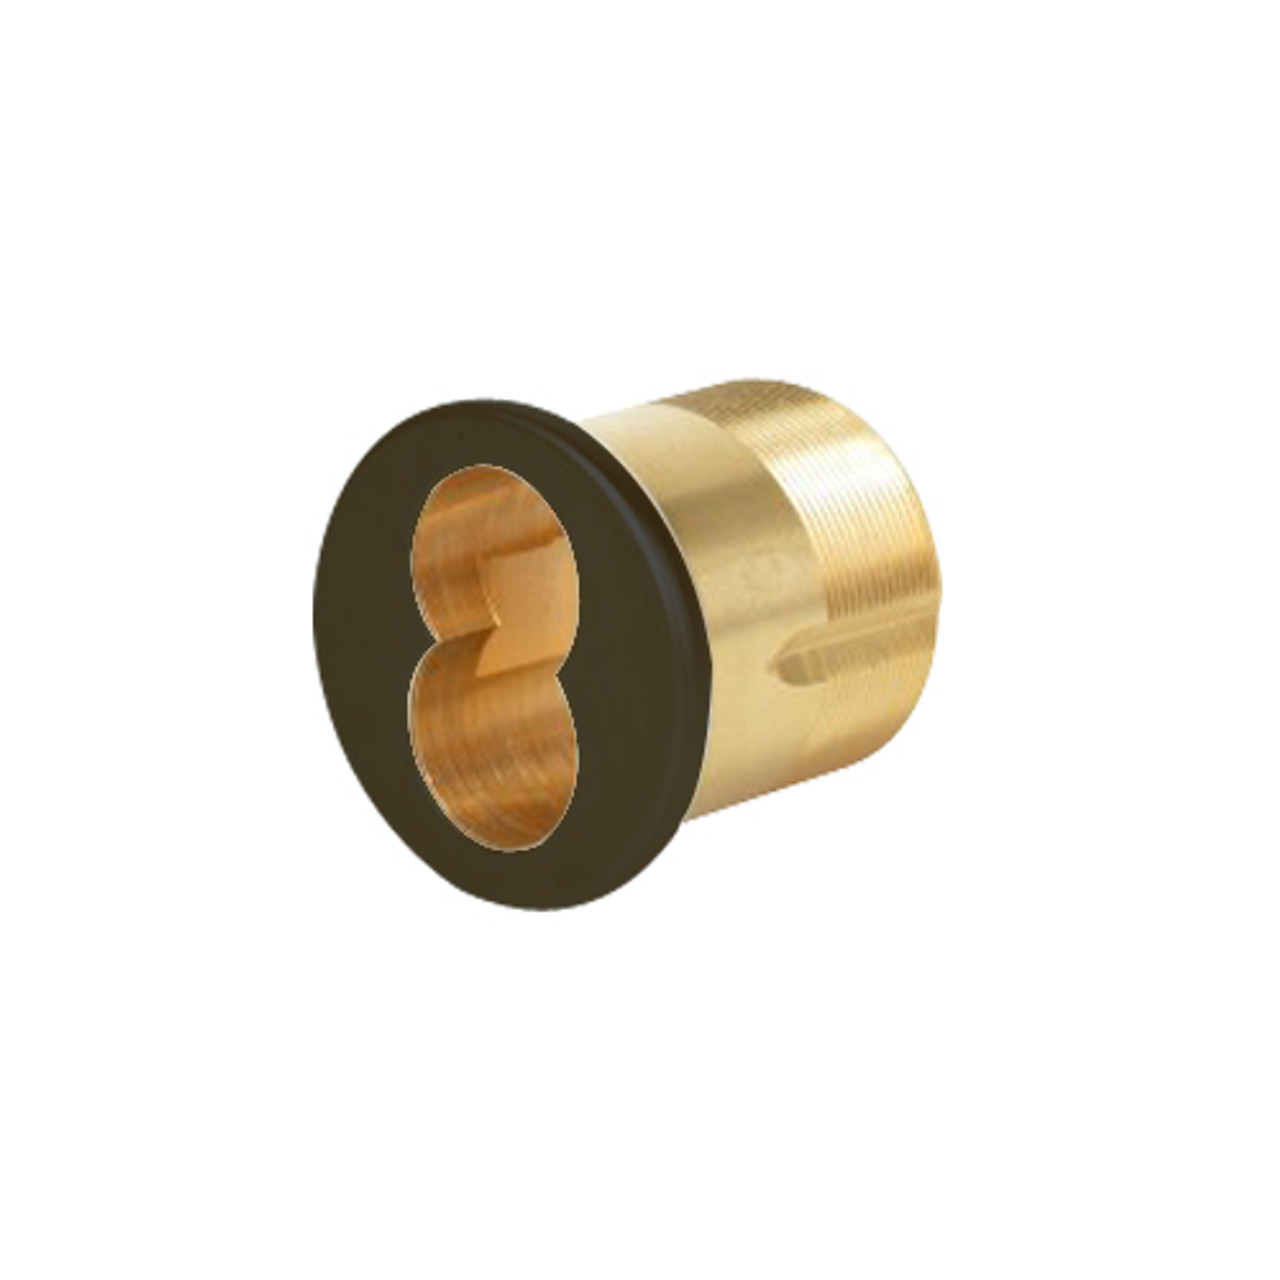 CR1070-114-A02-6-613 Corbin Mortise Interchangeable Core Housing with Straight Cam in Oil Rubbed Bronze Finish